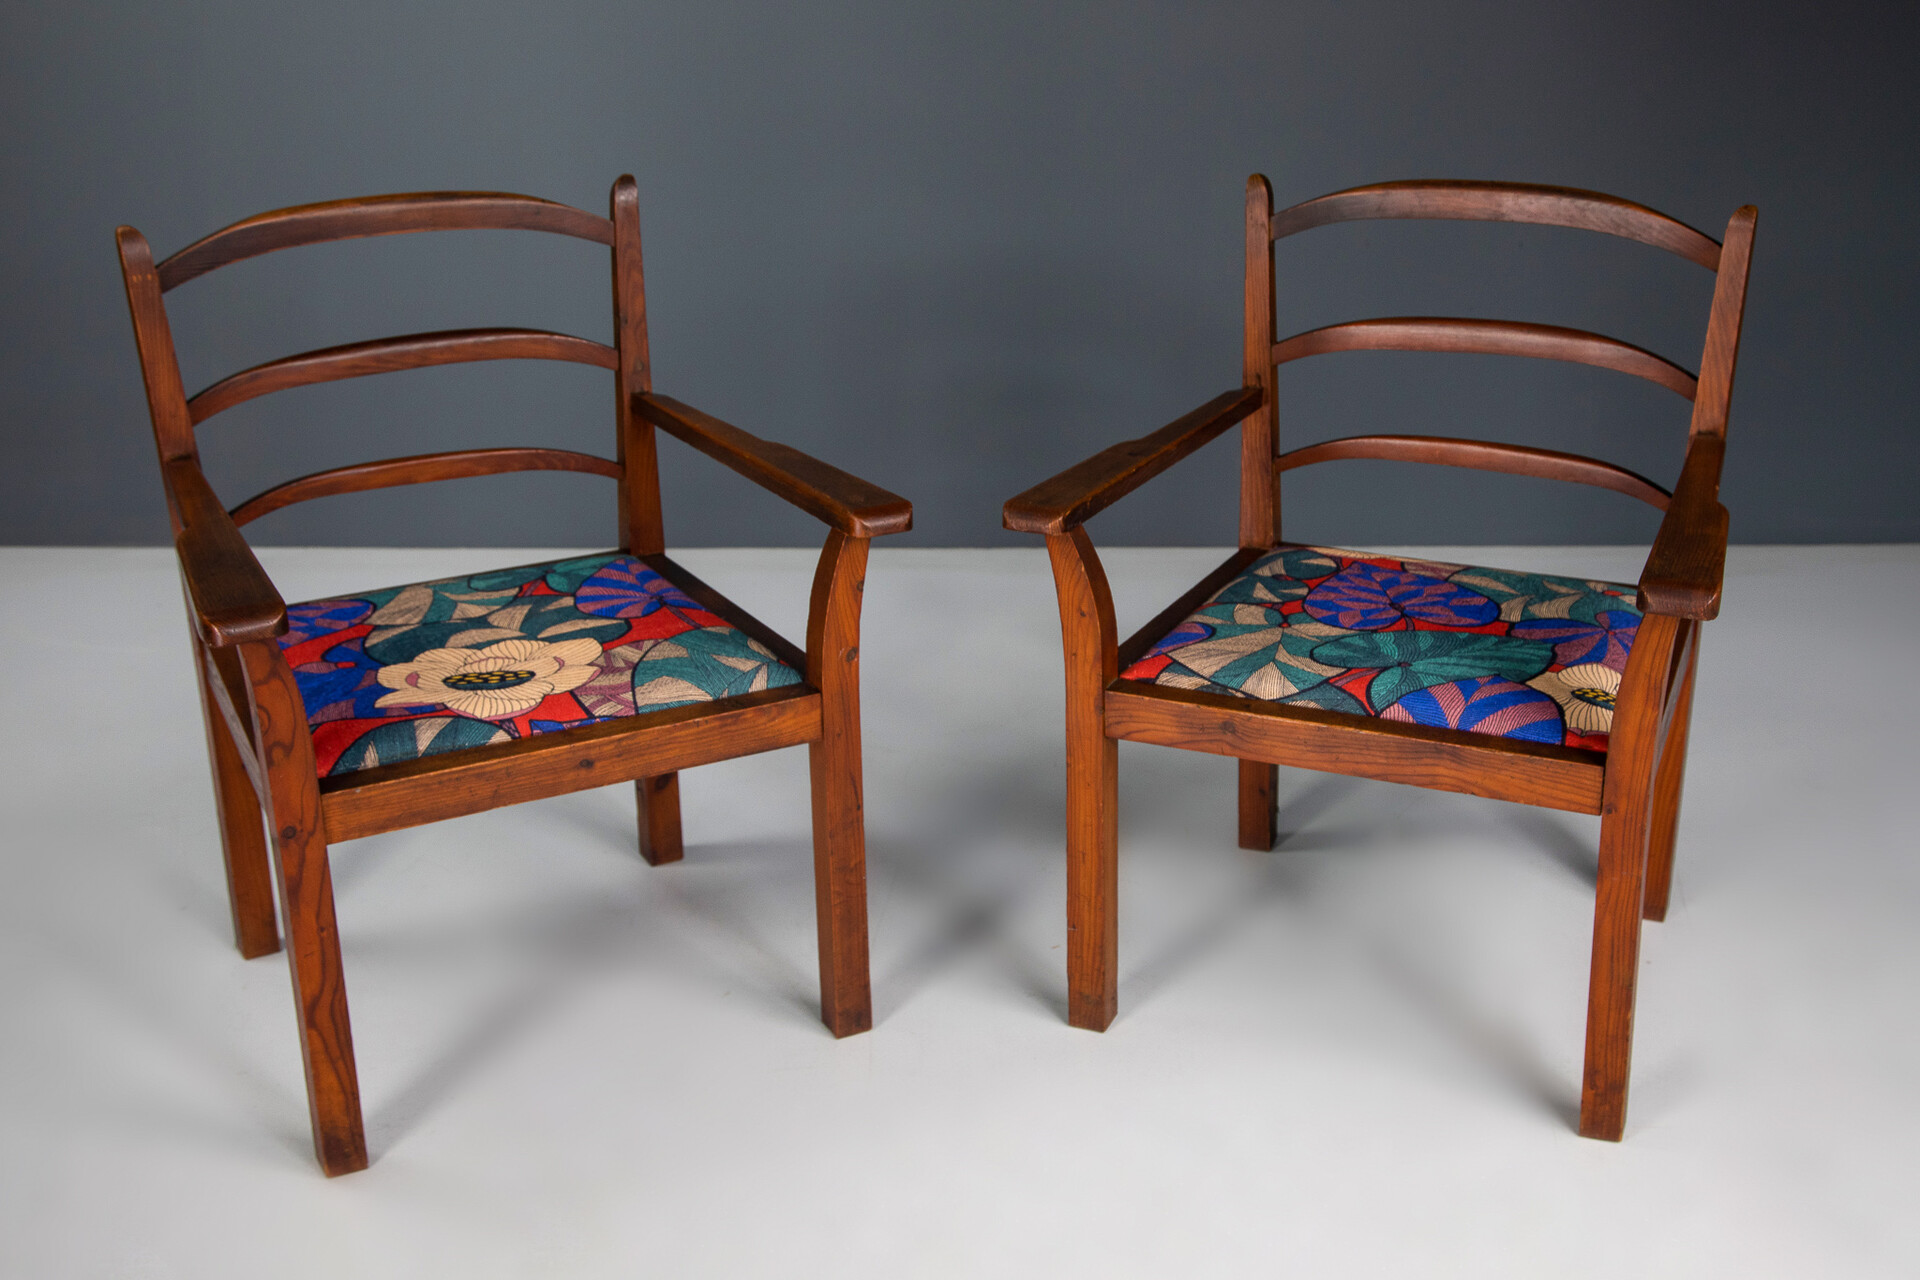 Mid century modern Armchairs with colorful new upholstery in the manner of  Josef Frank Vienna 1930s Mid-20th century